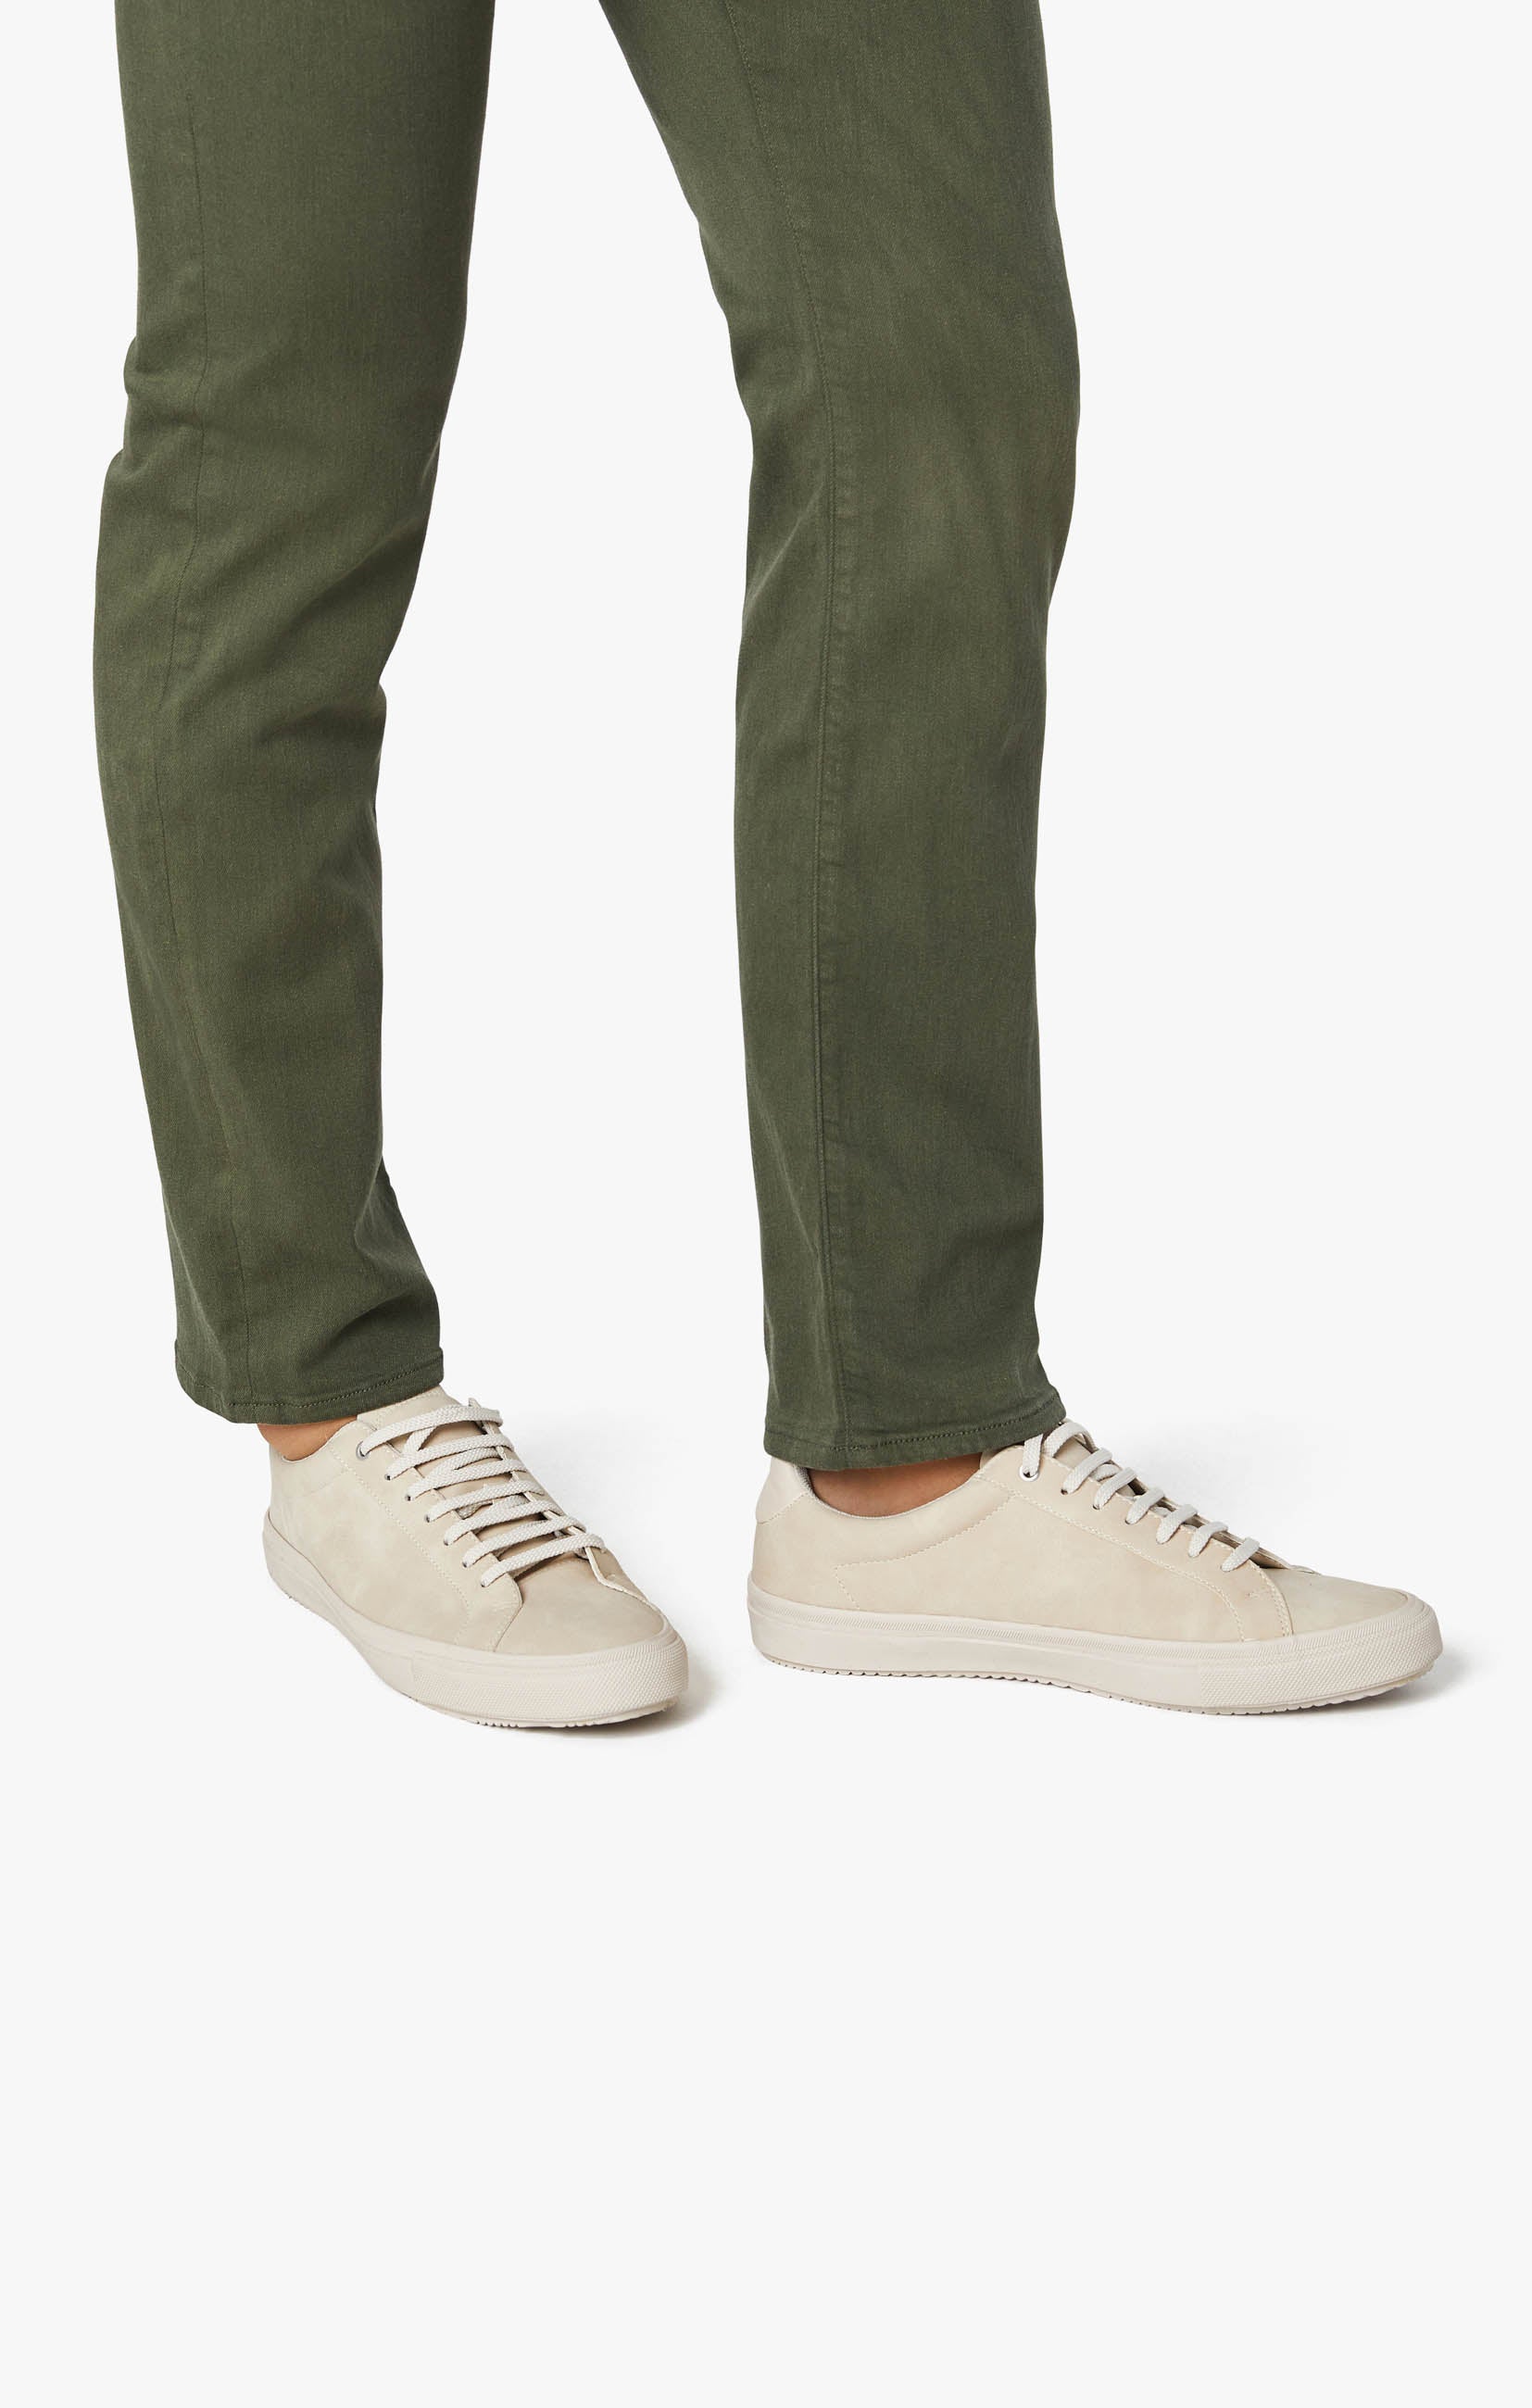 Courage Straight Leg Pants In Military Green Comfort Image 6